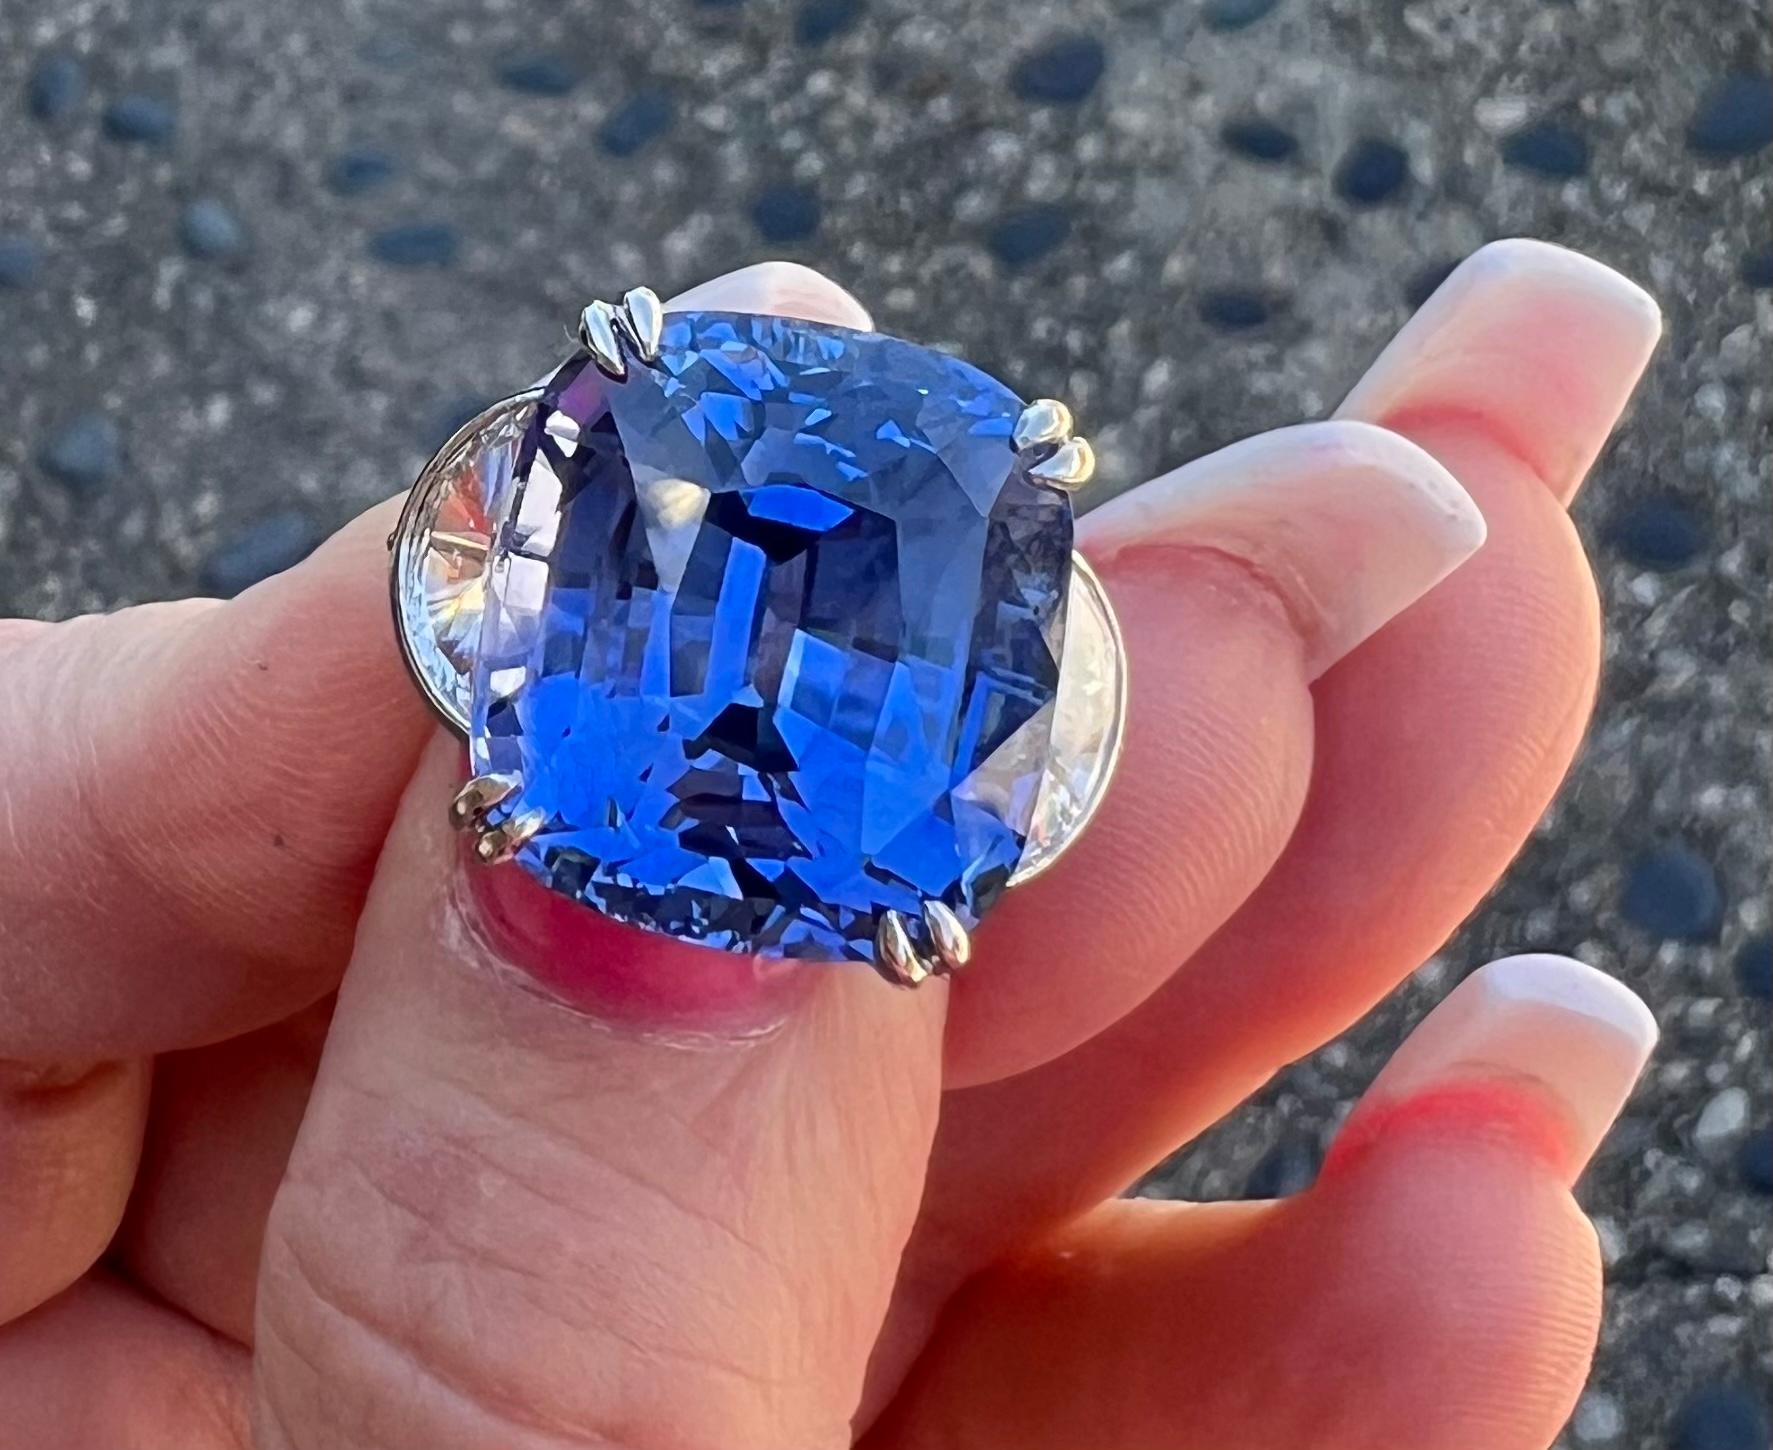 Stupendous and very significant, 33.77 carat estate GIA Certified huge brilliant cut natural corundum blue sapphire and diamond three stone ring is set in platinum. This is a very noteworthy and very collectible natural sapphire with no indications